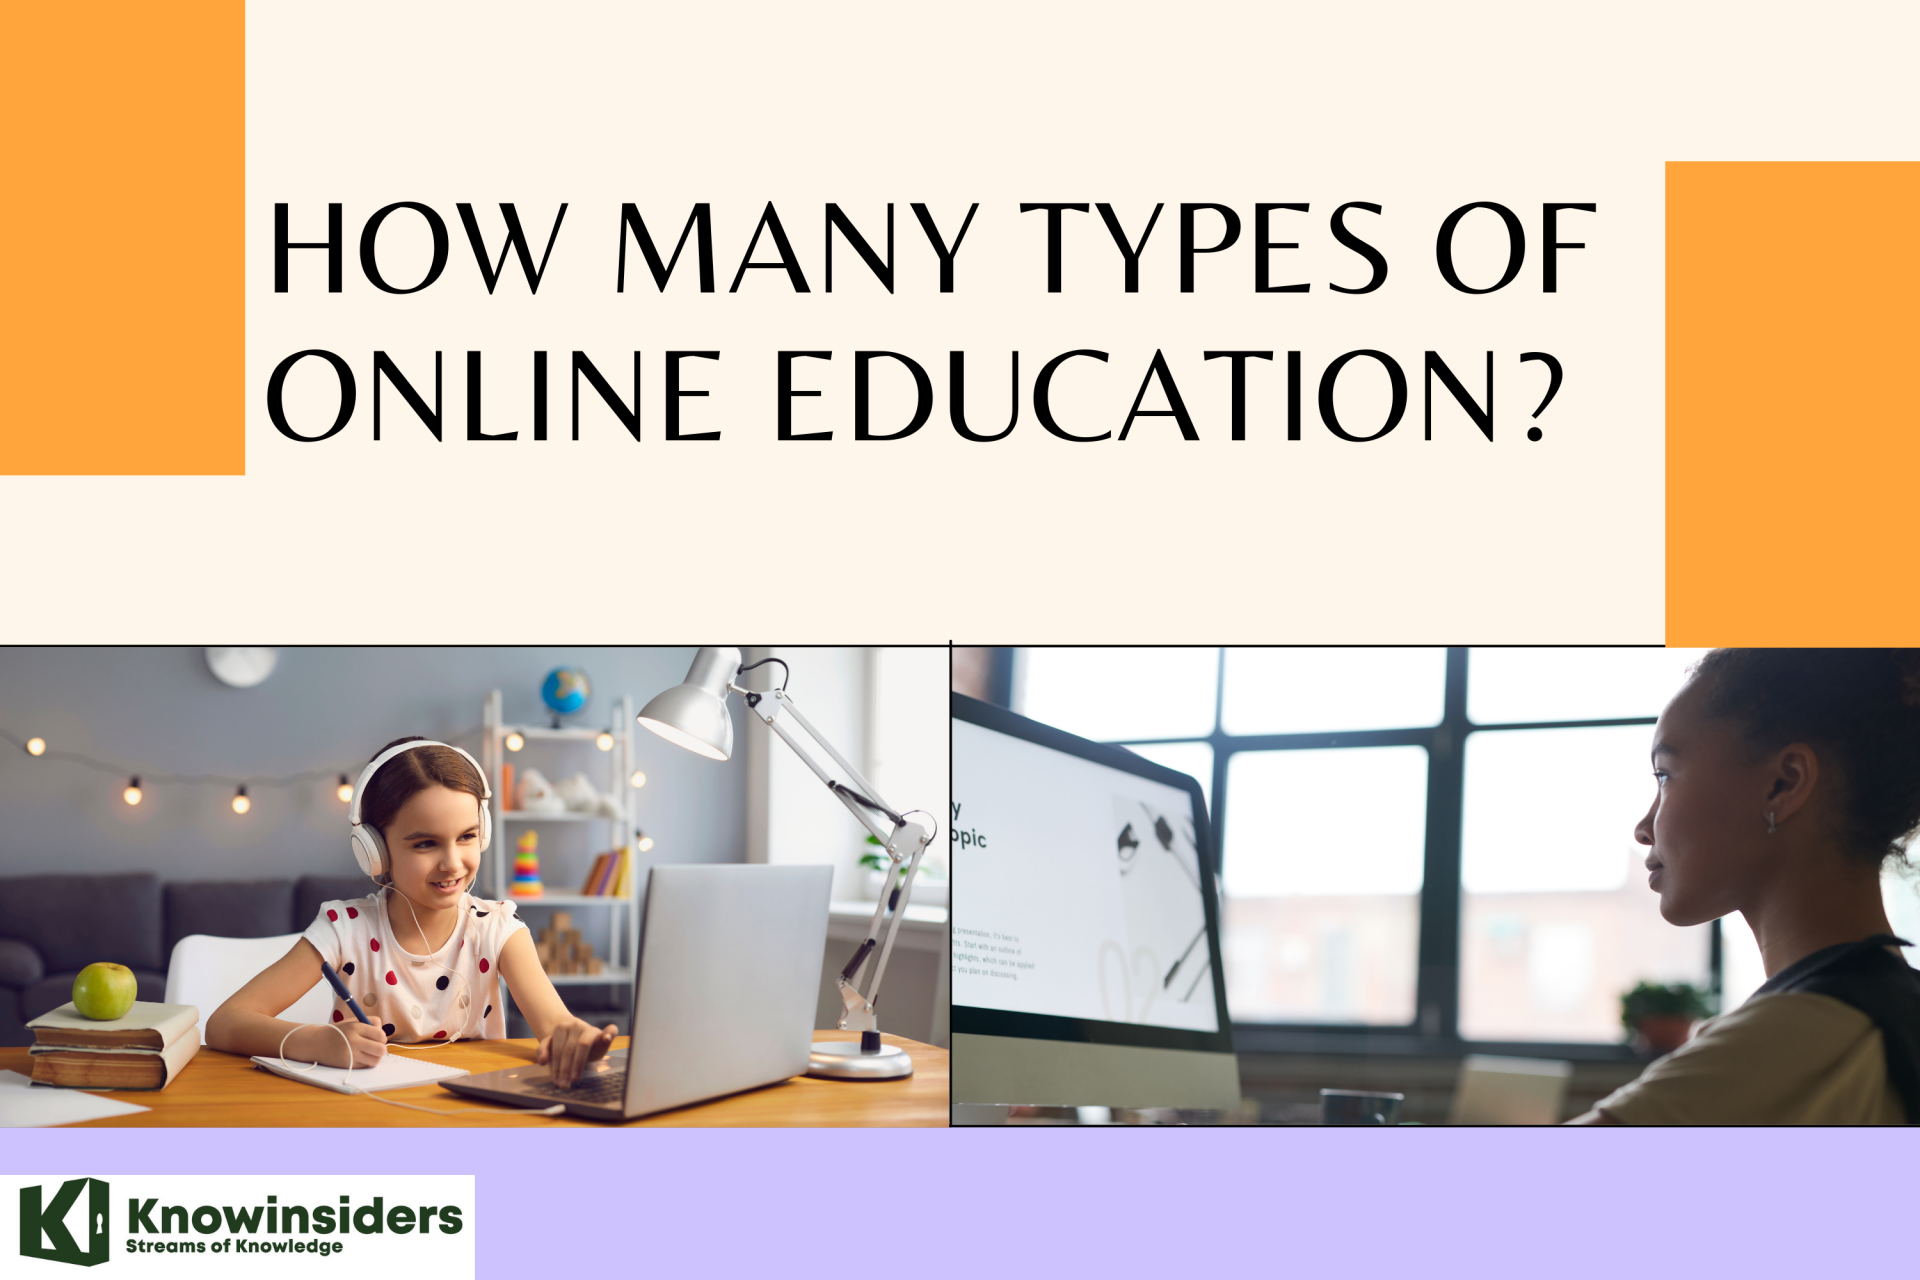 How Many Types of Online Education & Learning?